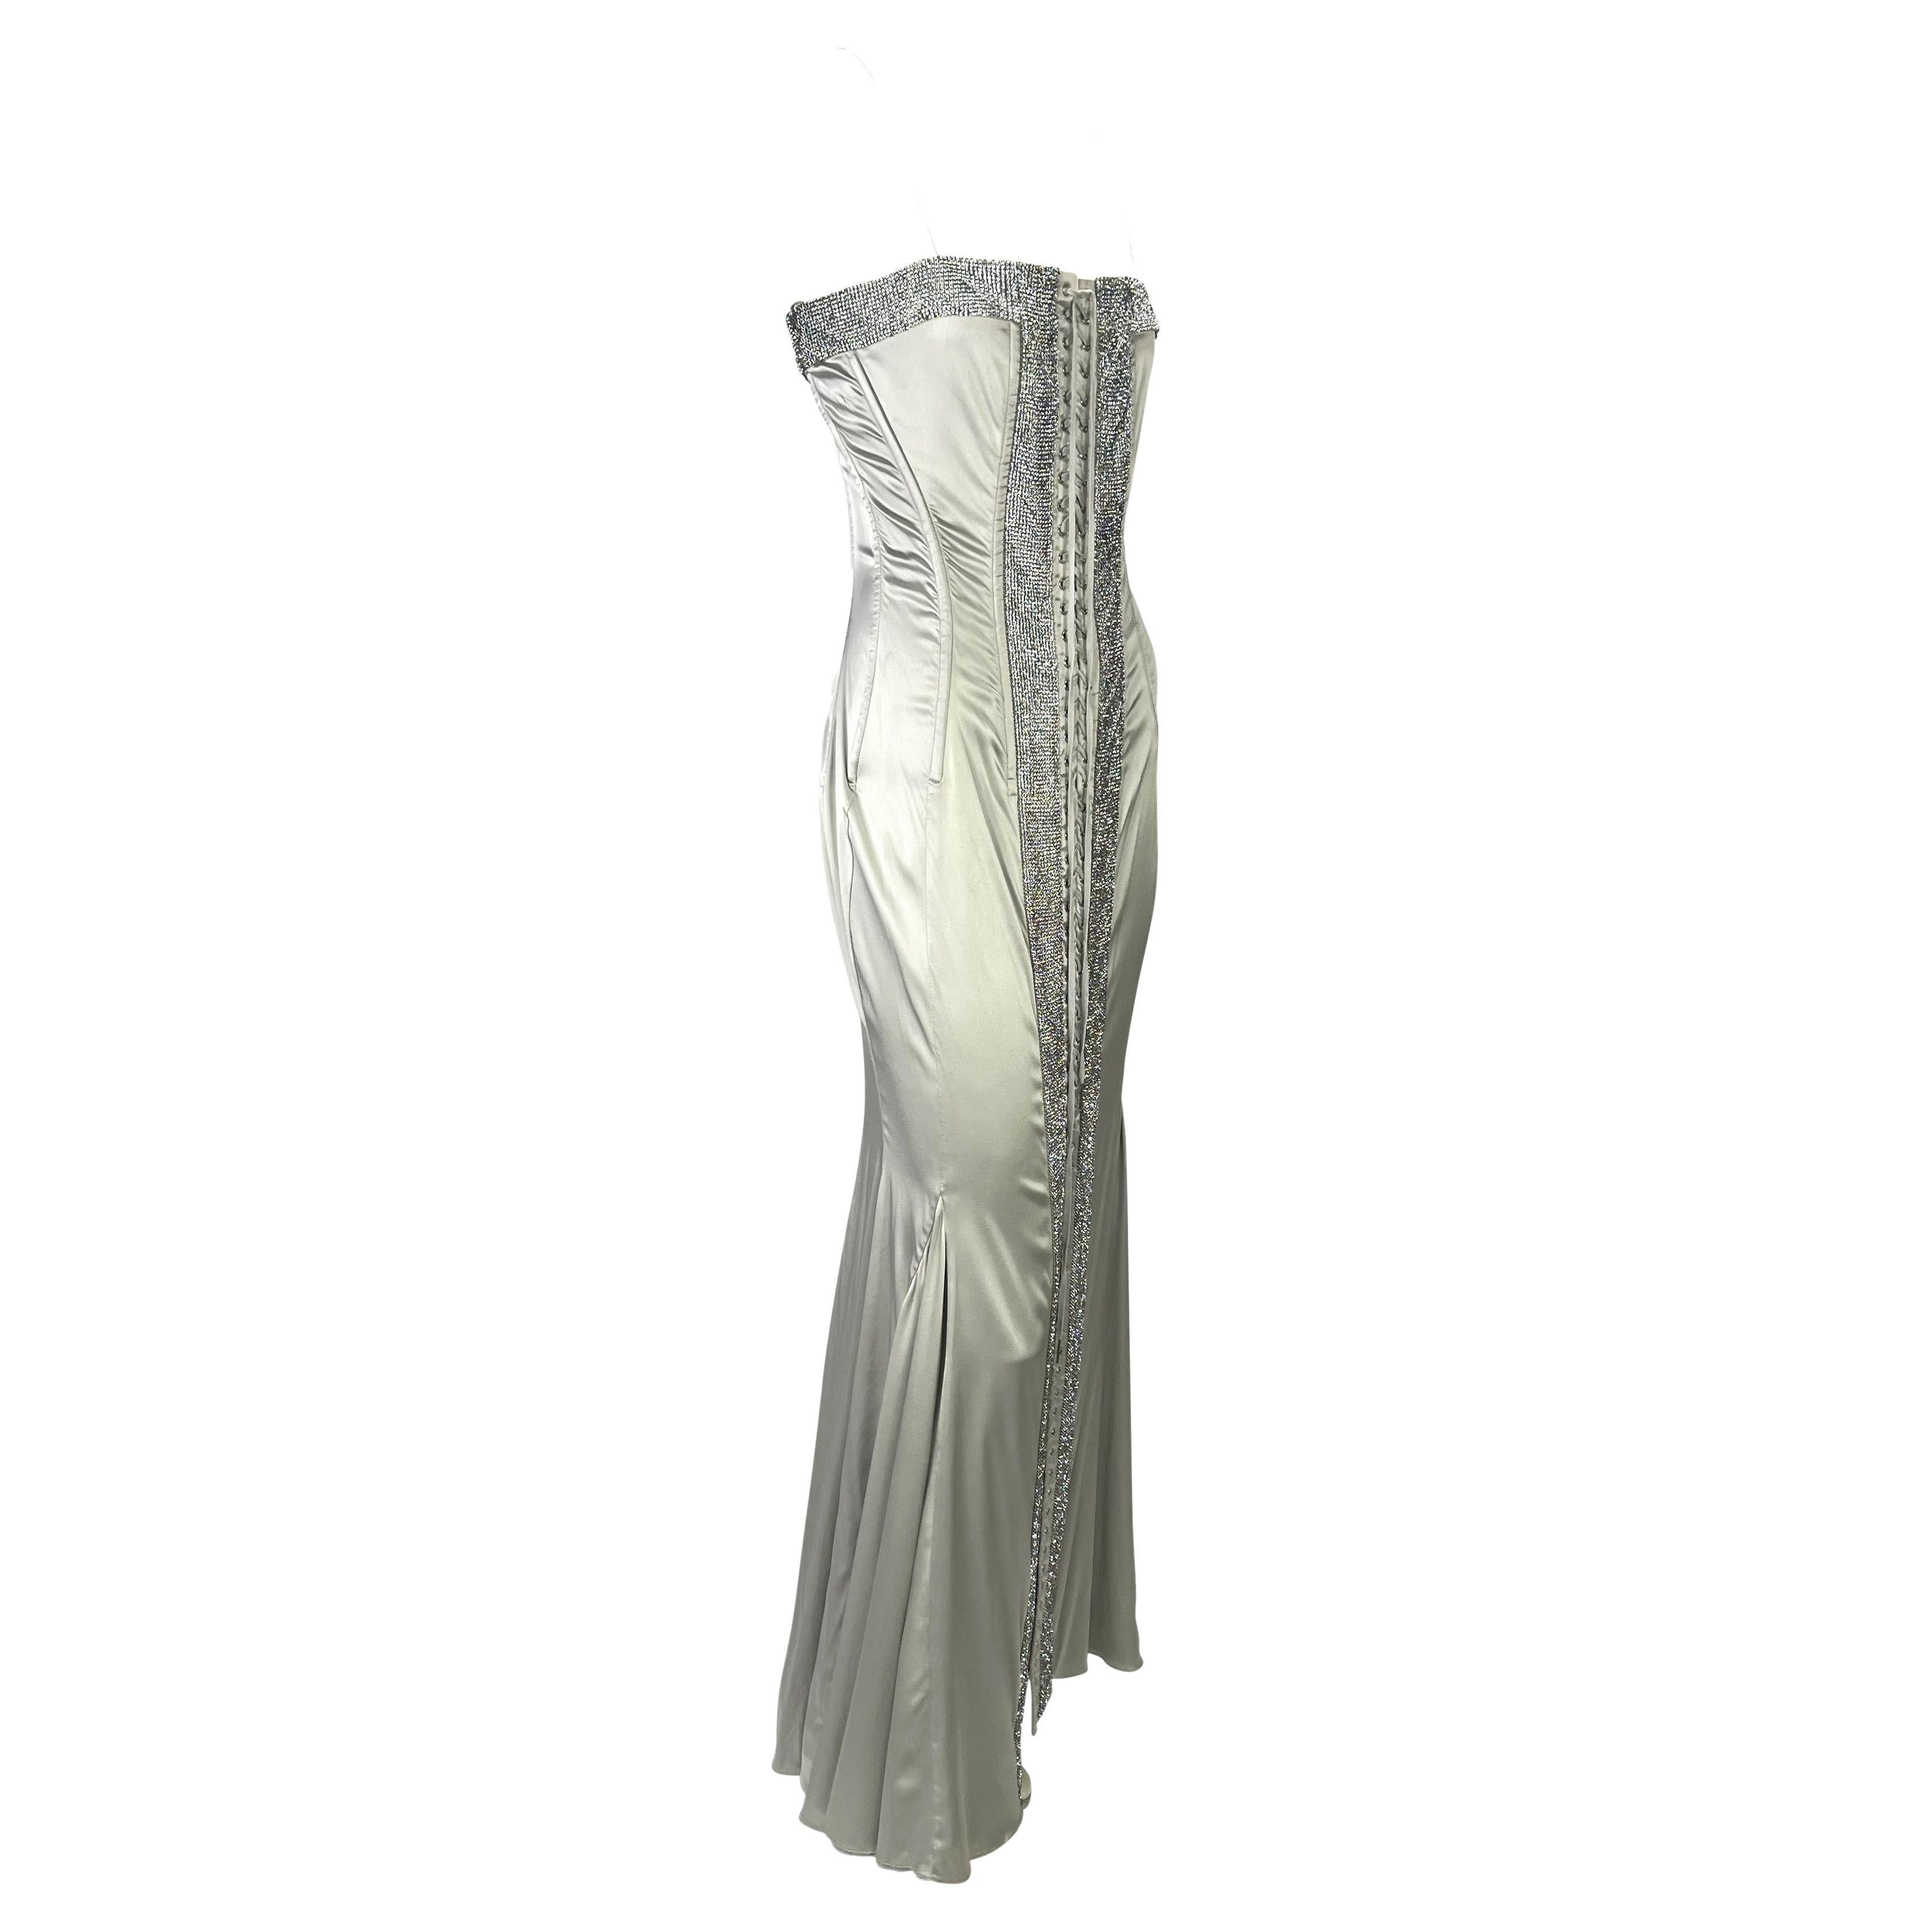 S/S 2004 Dolce & Gabbana Runway Rhinestone Lace-Up Silver Stretch Satin Gown 8